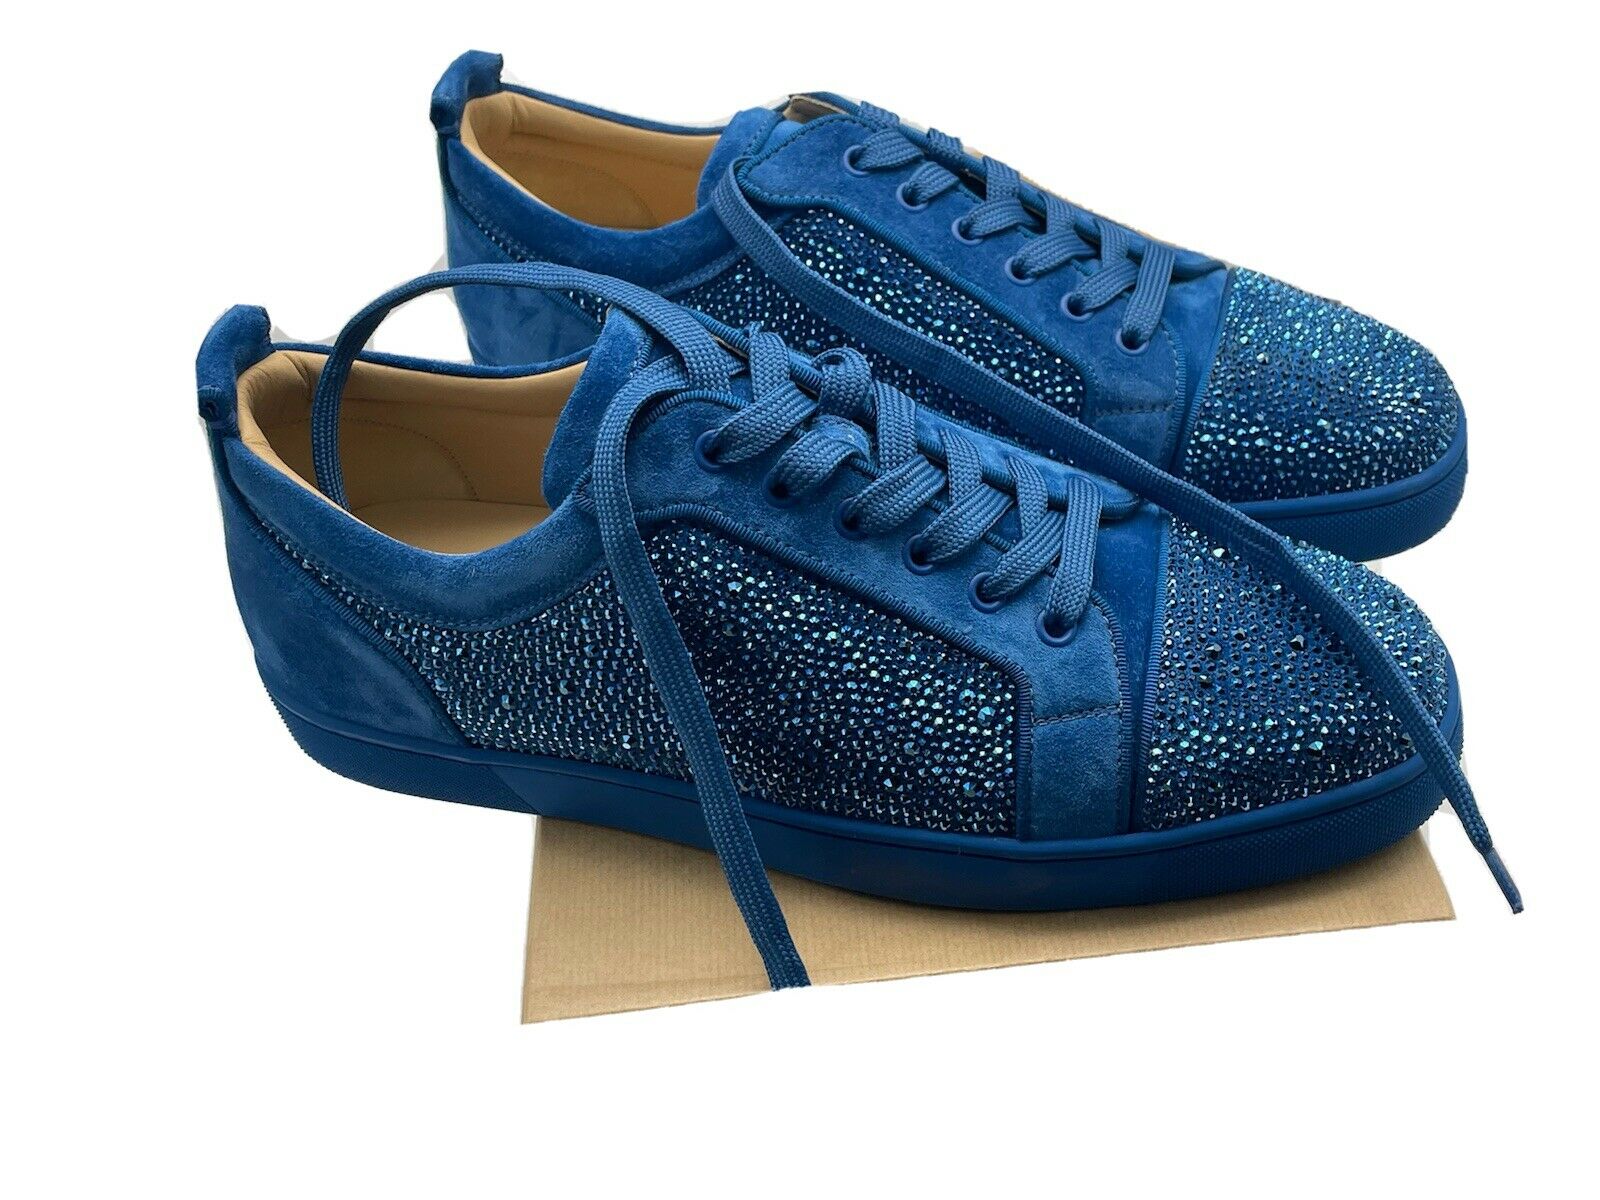 CHRISTIAN LOUBOUTIN MEN'S LOUIS JUNIOR STRASS FLATS SNEAKERS SIZE 44.5/11.5 New